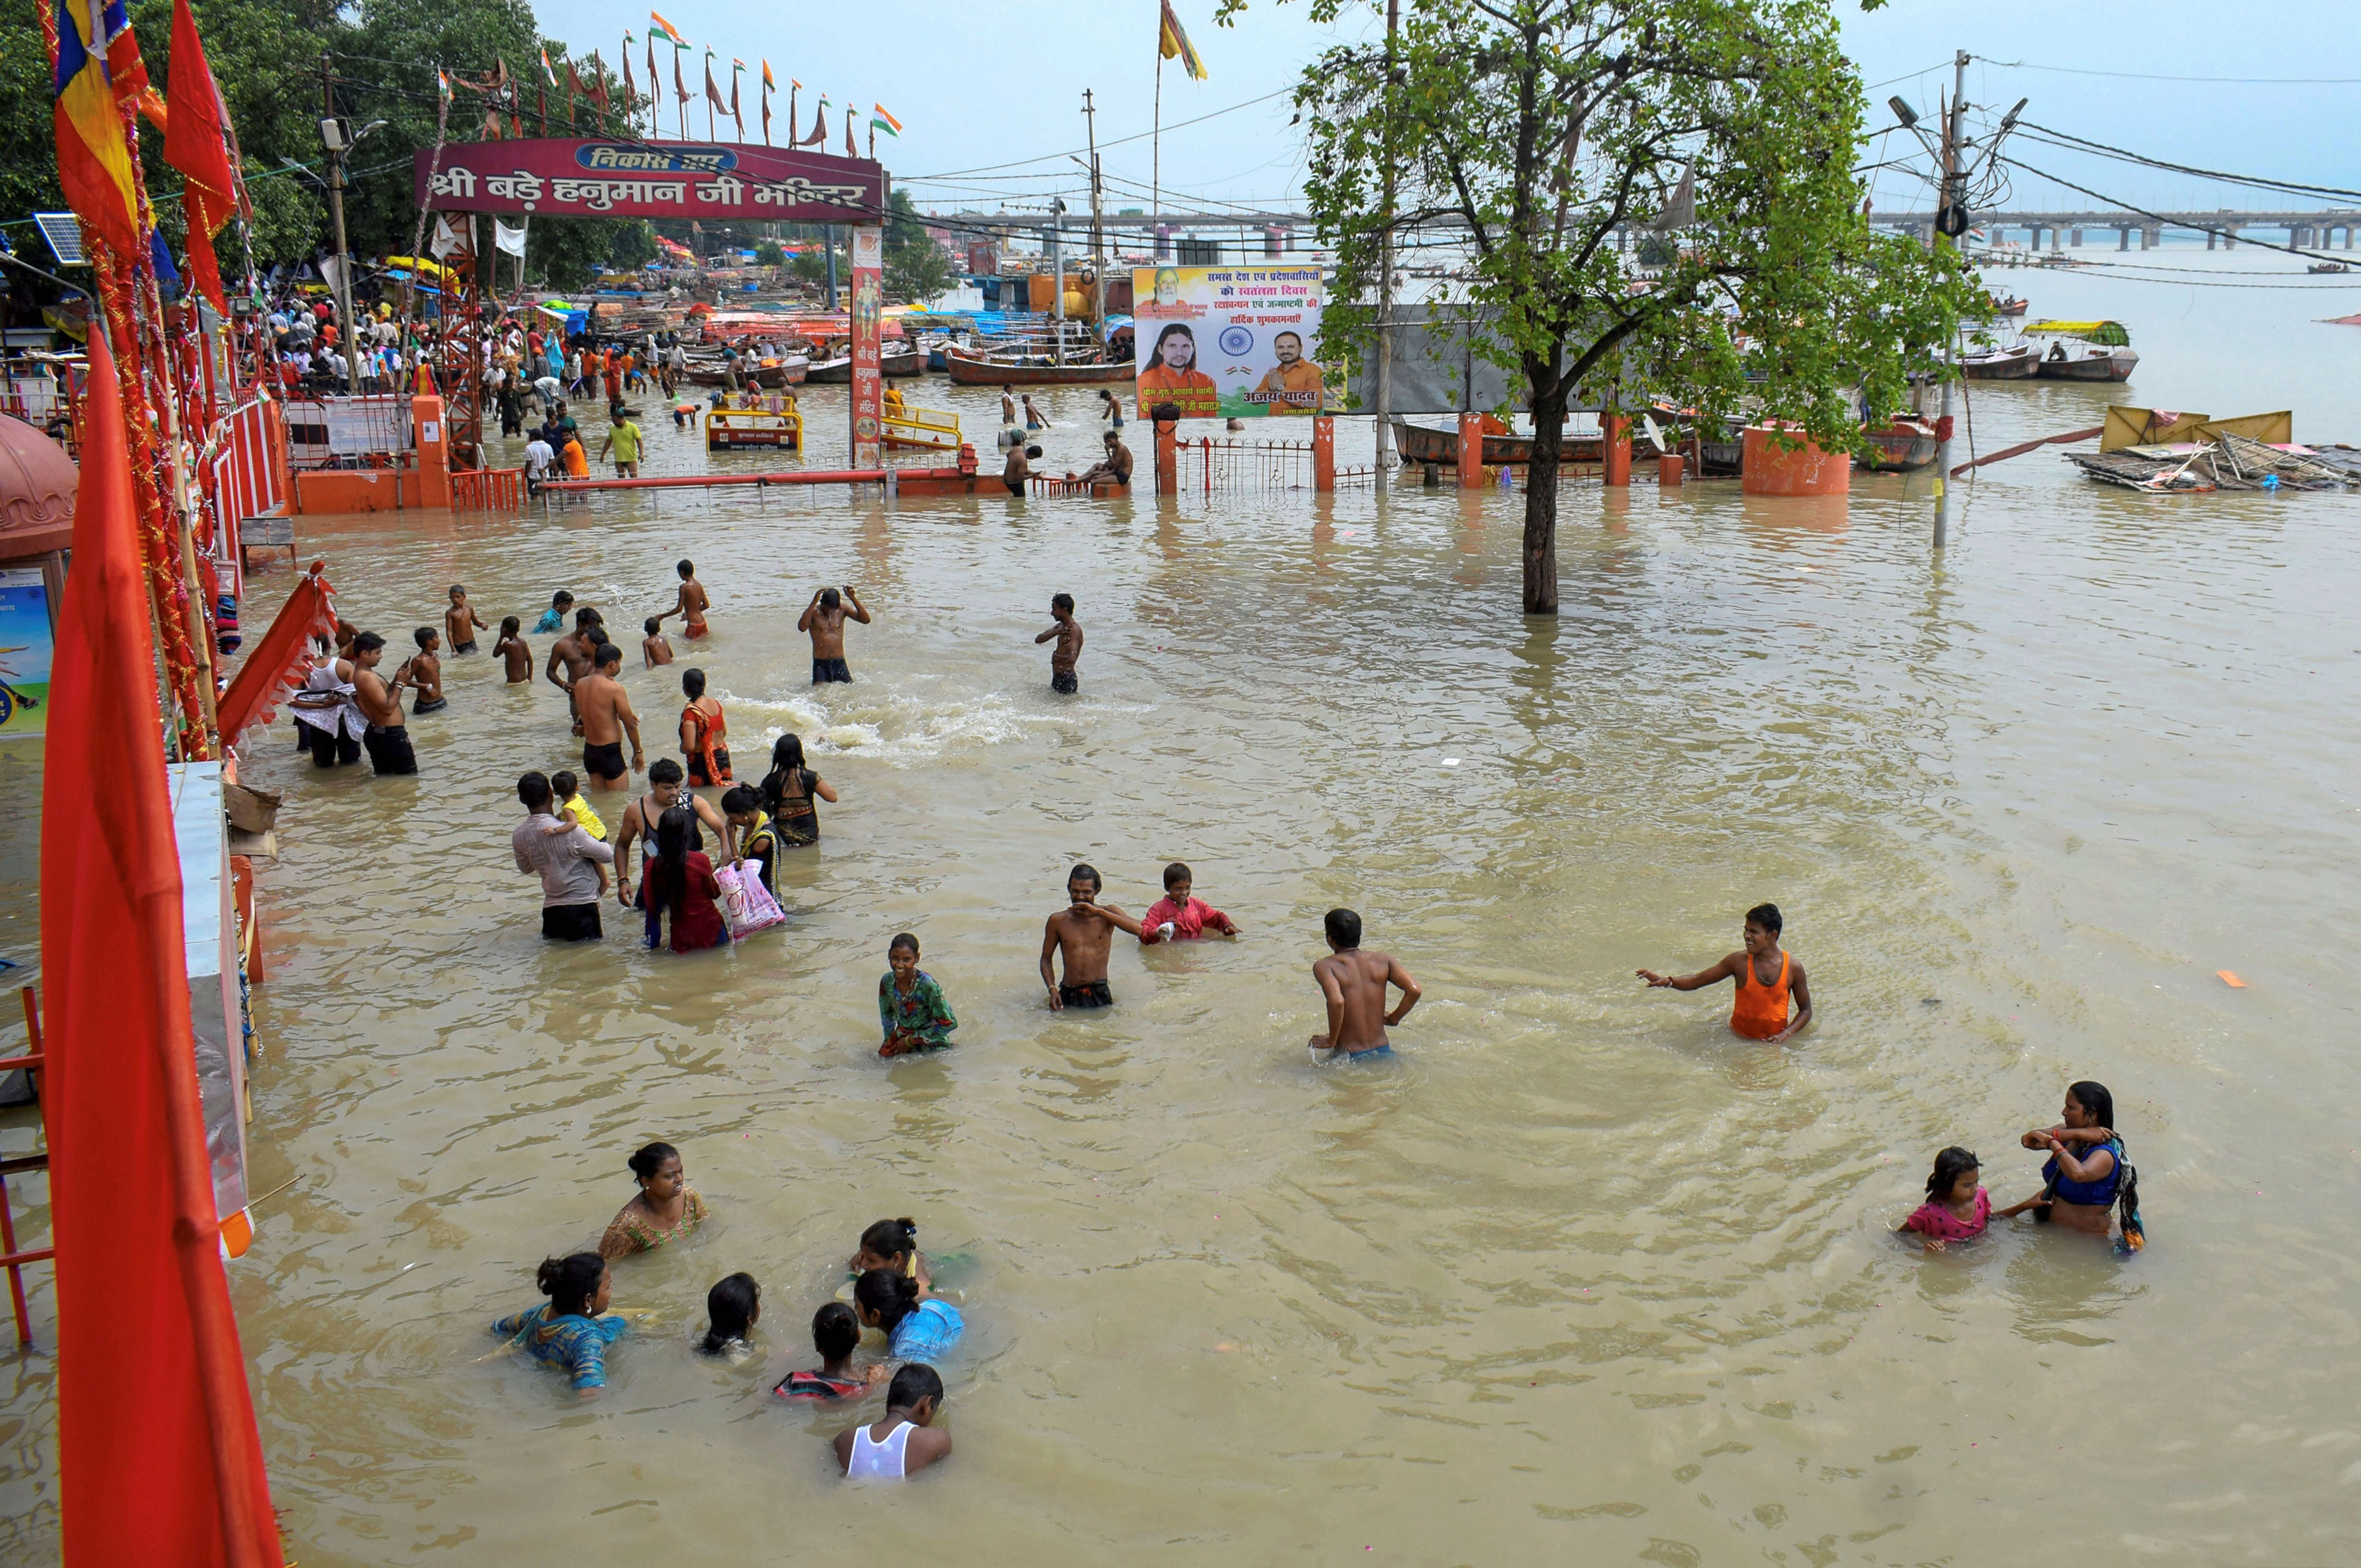 Devotees walk through the flood water in front of Bade Haumanji Temple near Sangam, confluence of the Ganges, the Yamuna and mythical Saraswati rivers, in Prayagraj - PTI